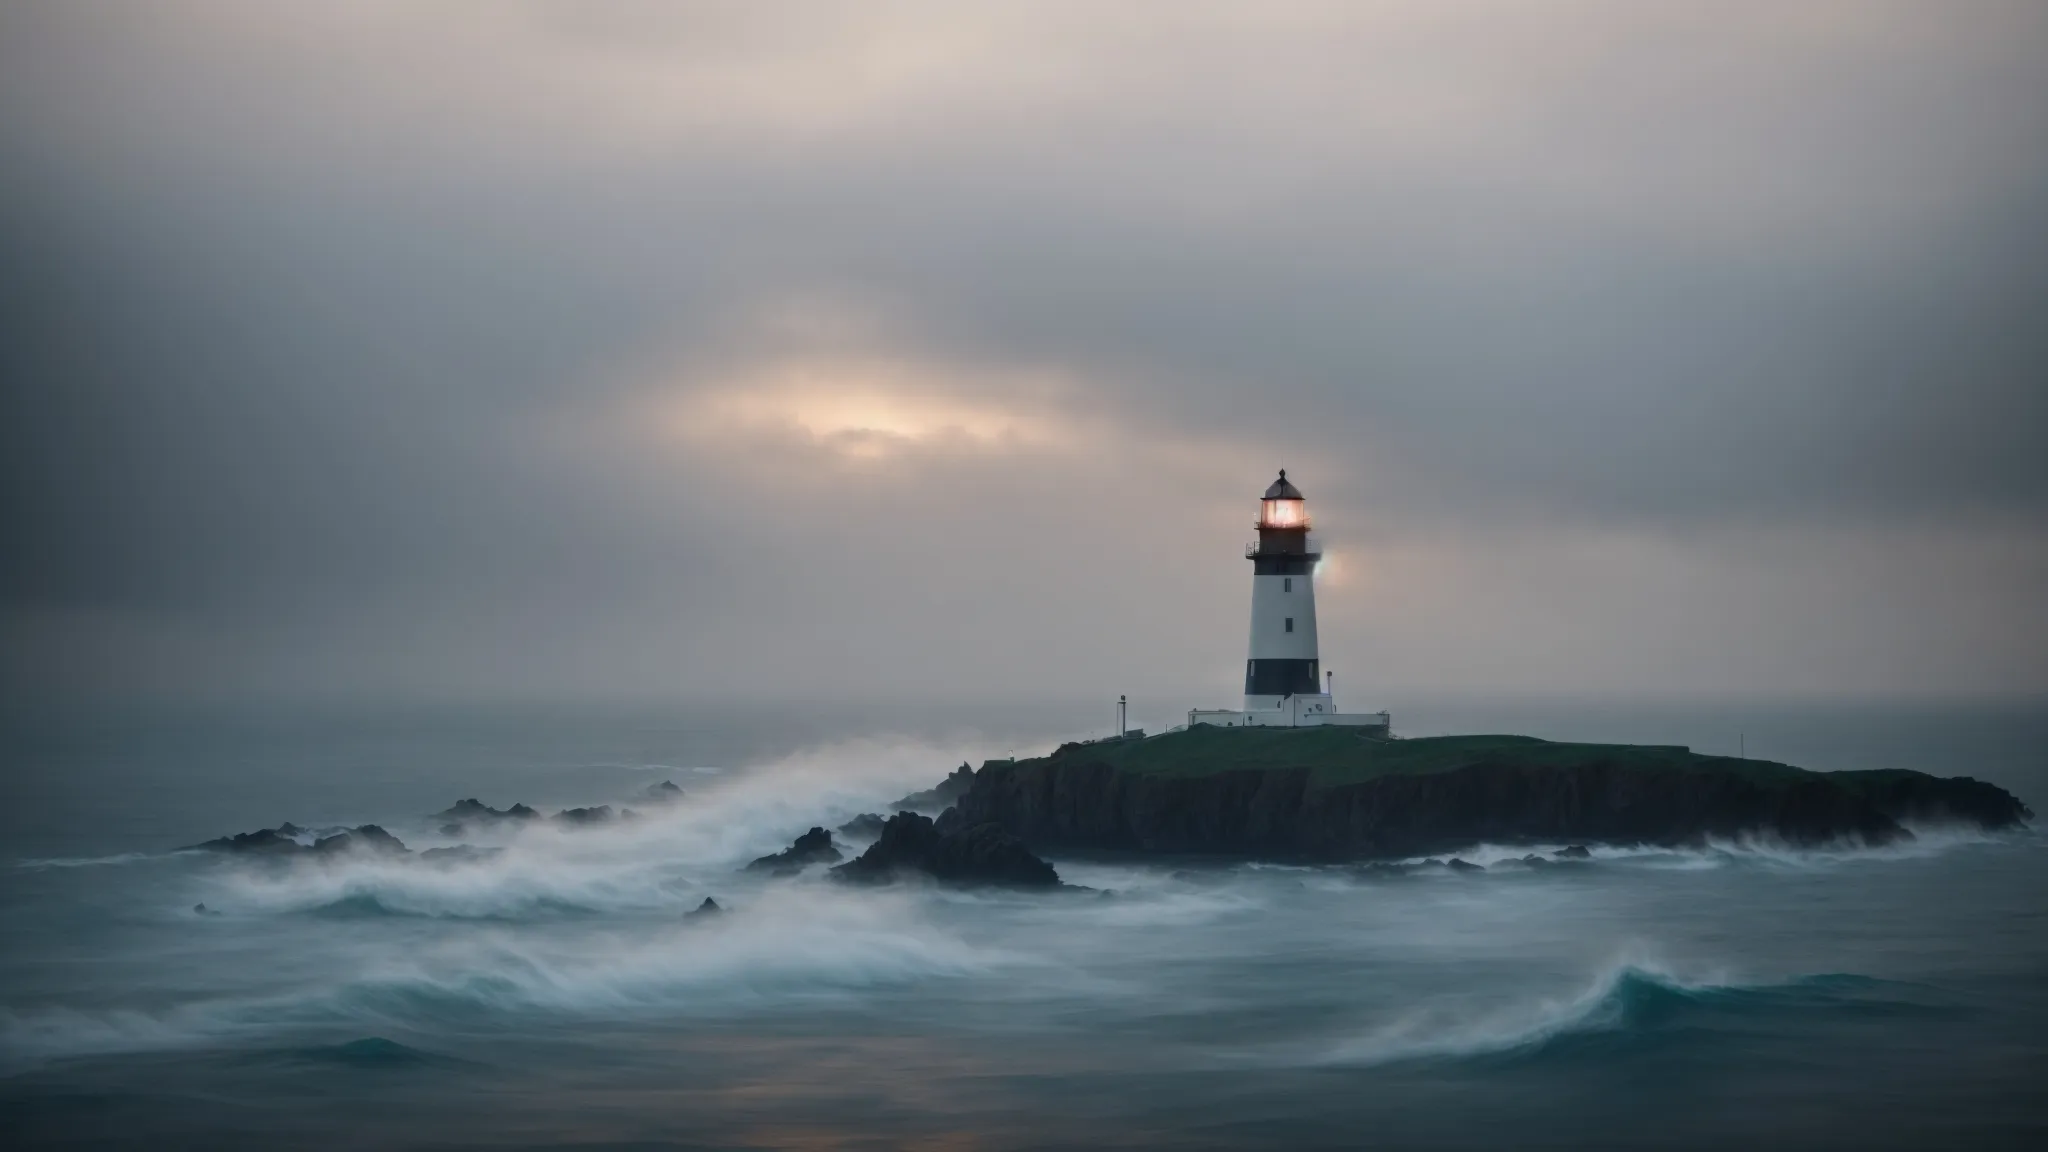 a lighthouse stands tall by the sea at dusk, its beam cutting through the fog, guiding ships safely to shore.